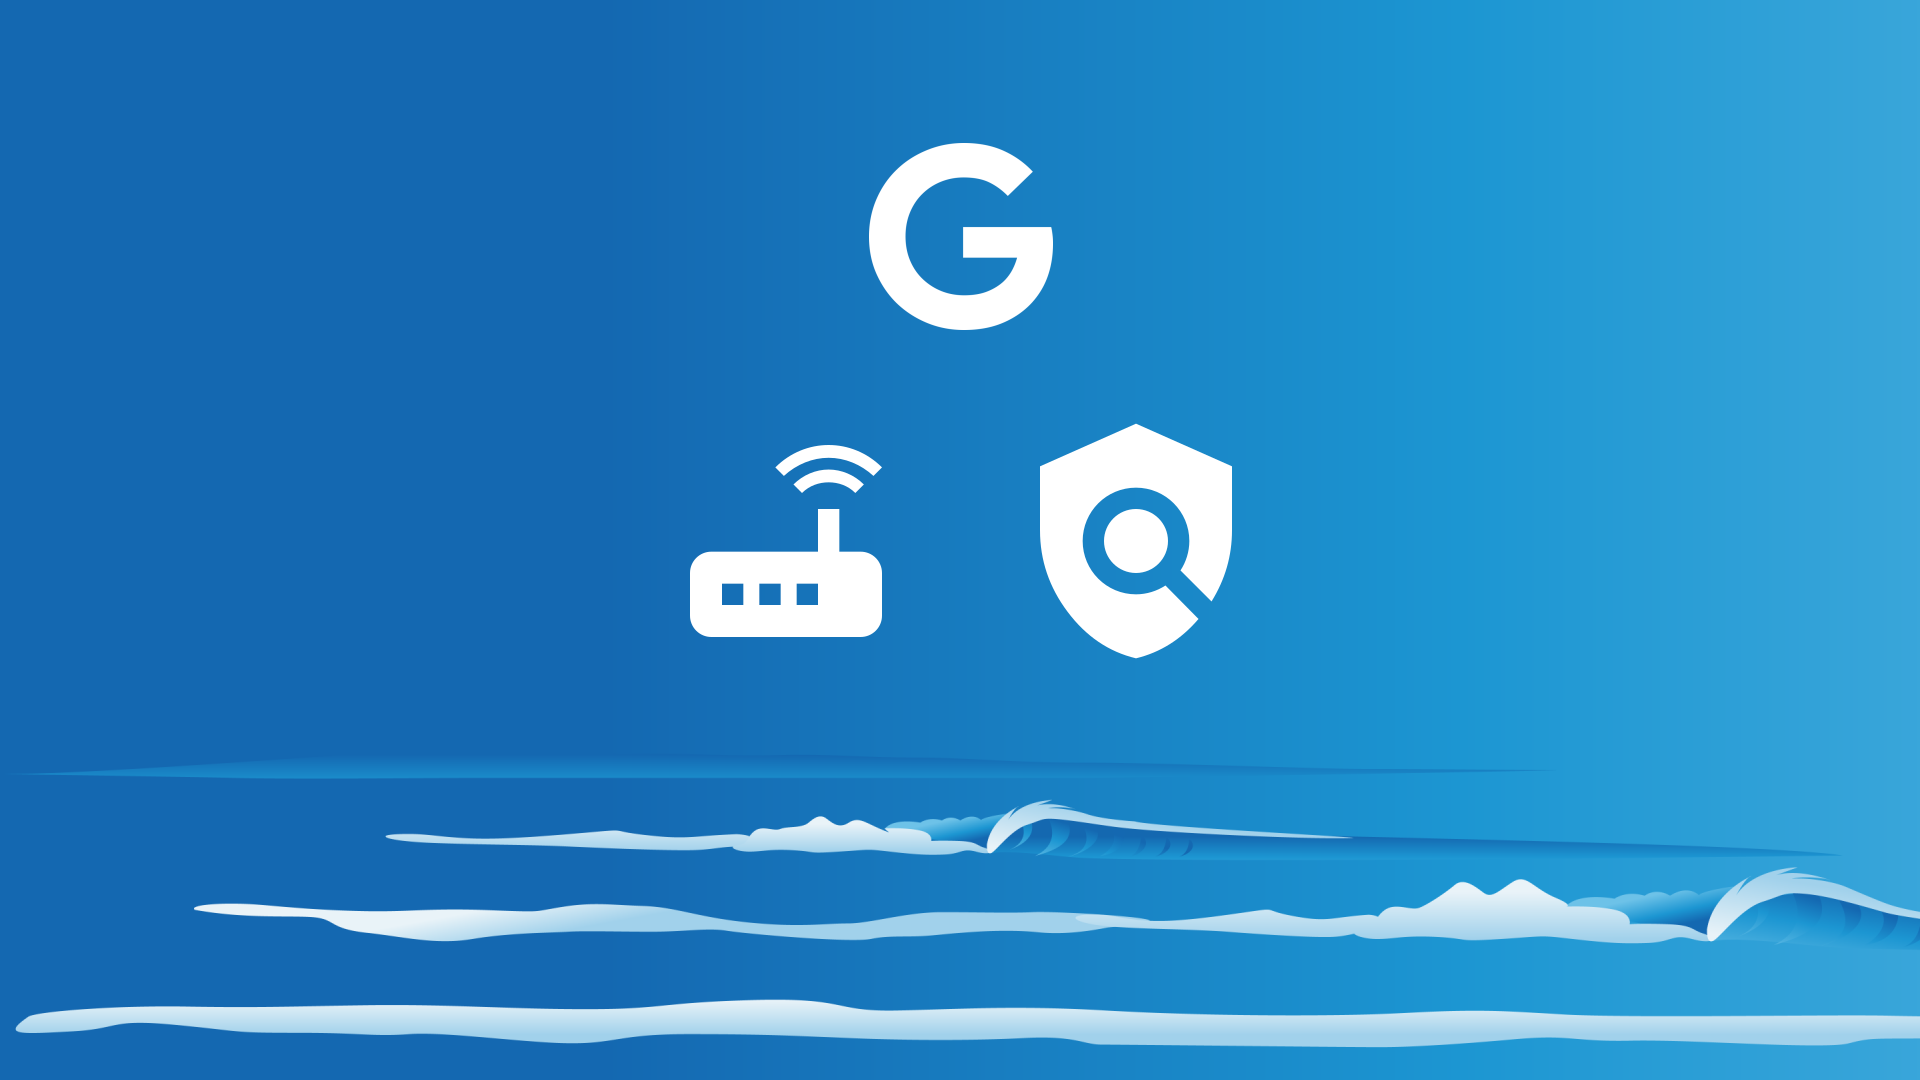 Sea background with router icon